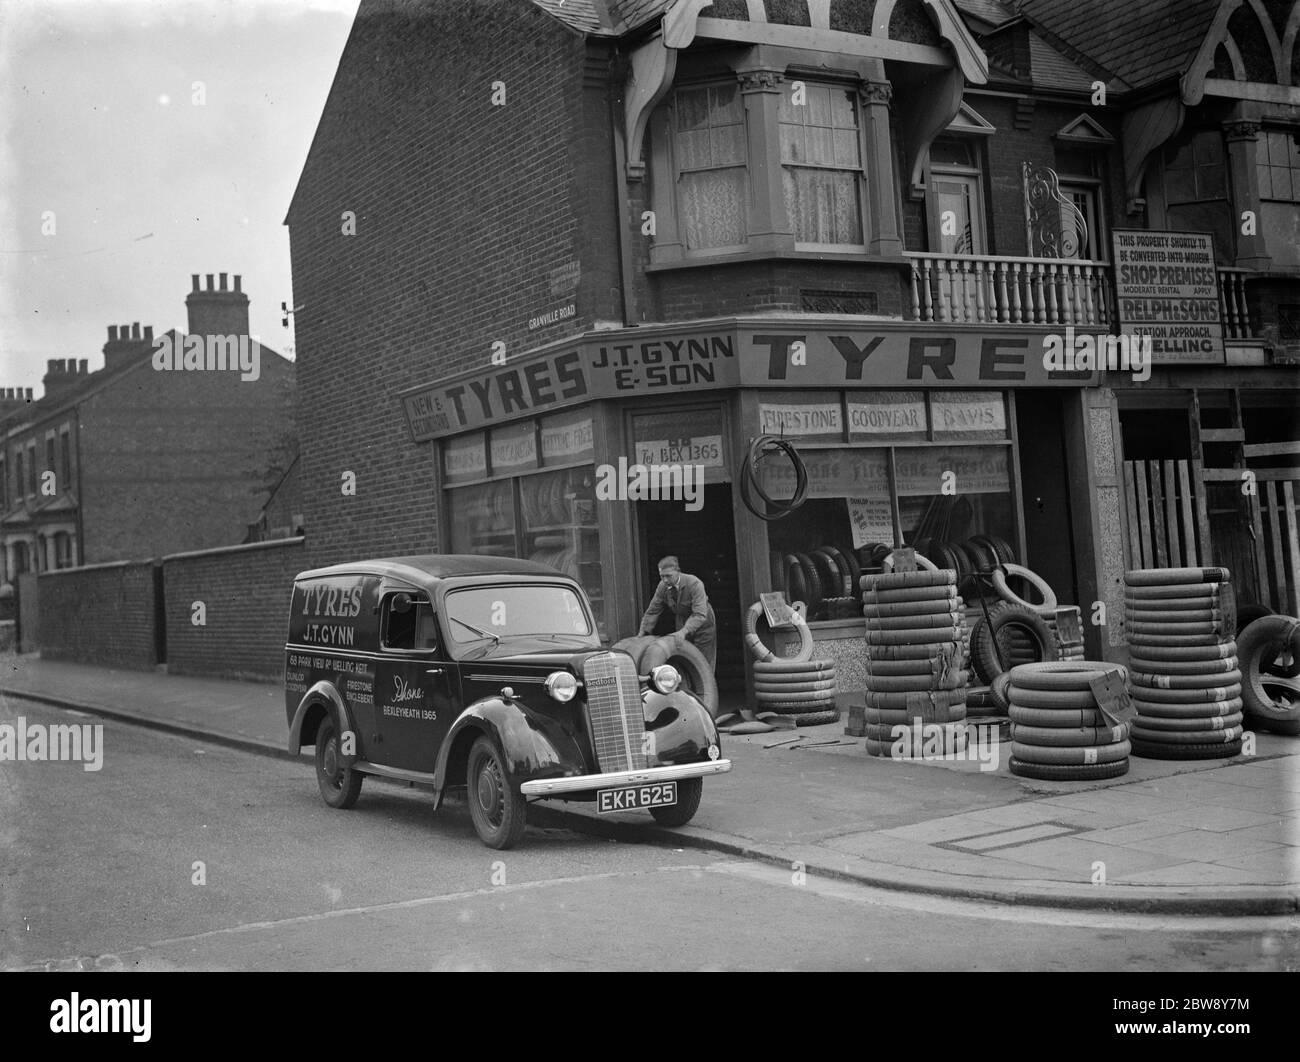 A J T Gynn and Son Tyres store with their Bedford truck parked outside ...